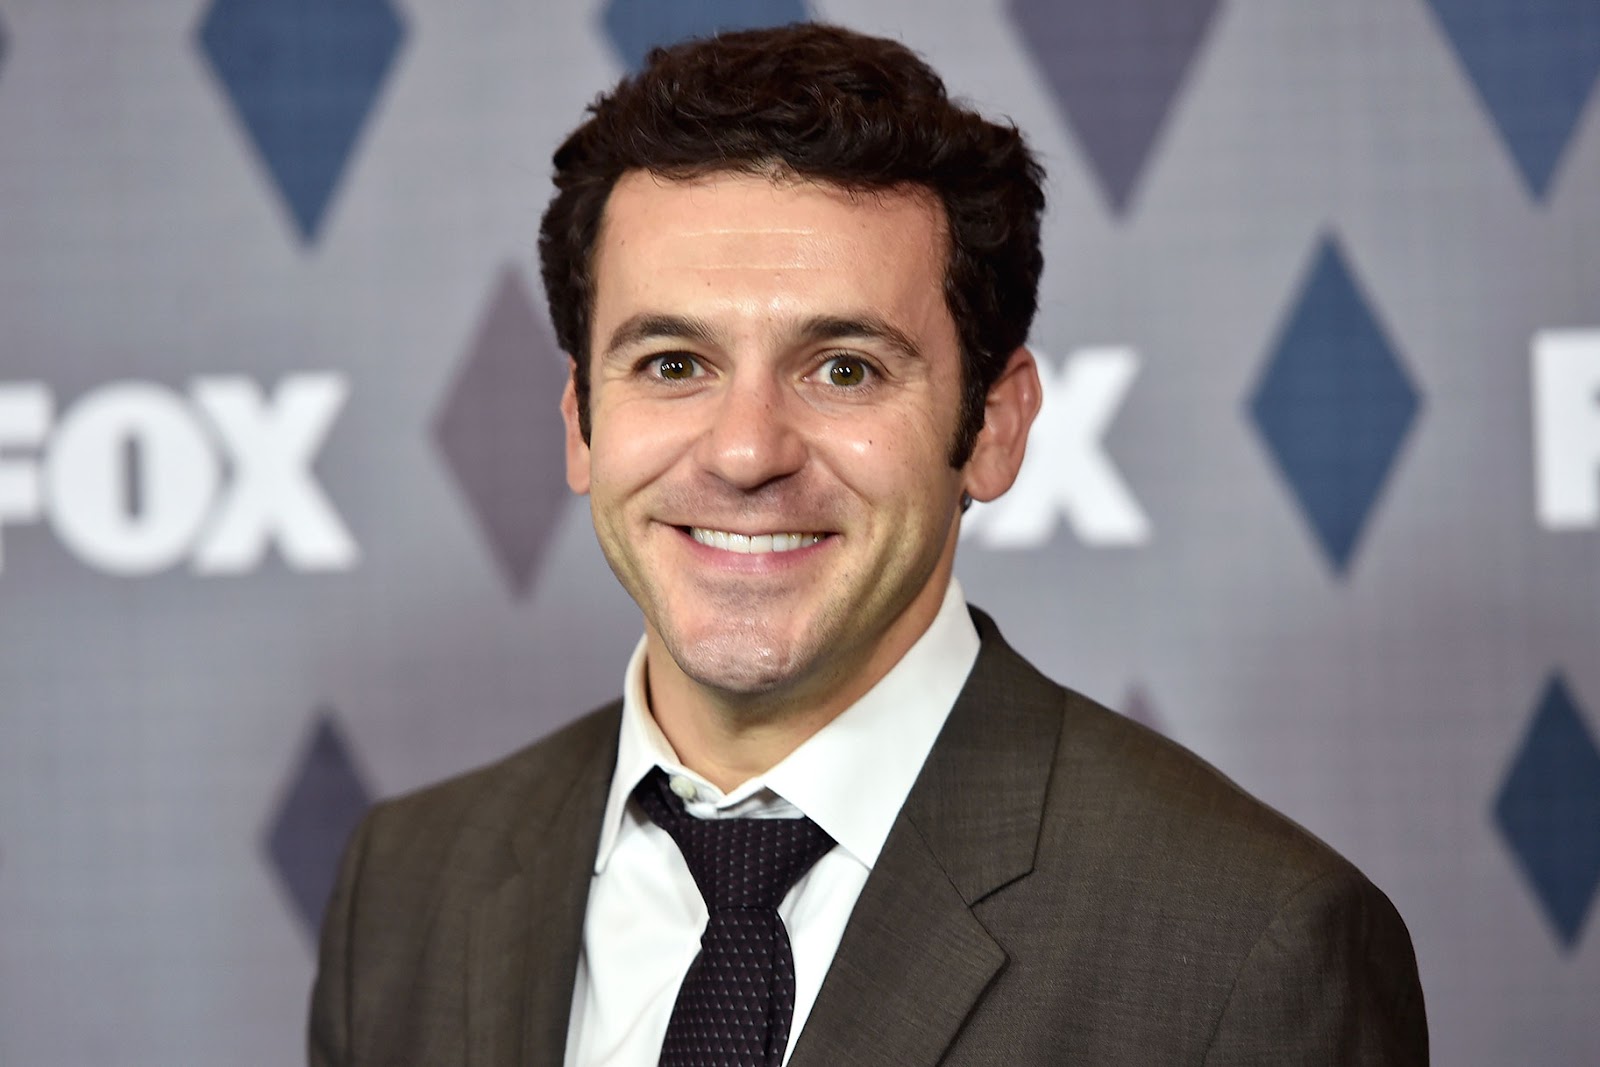 What Are Fred Savage’s Marital Status And Net Worth?